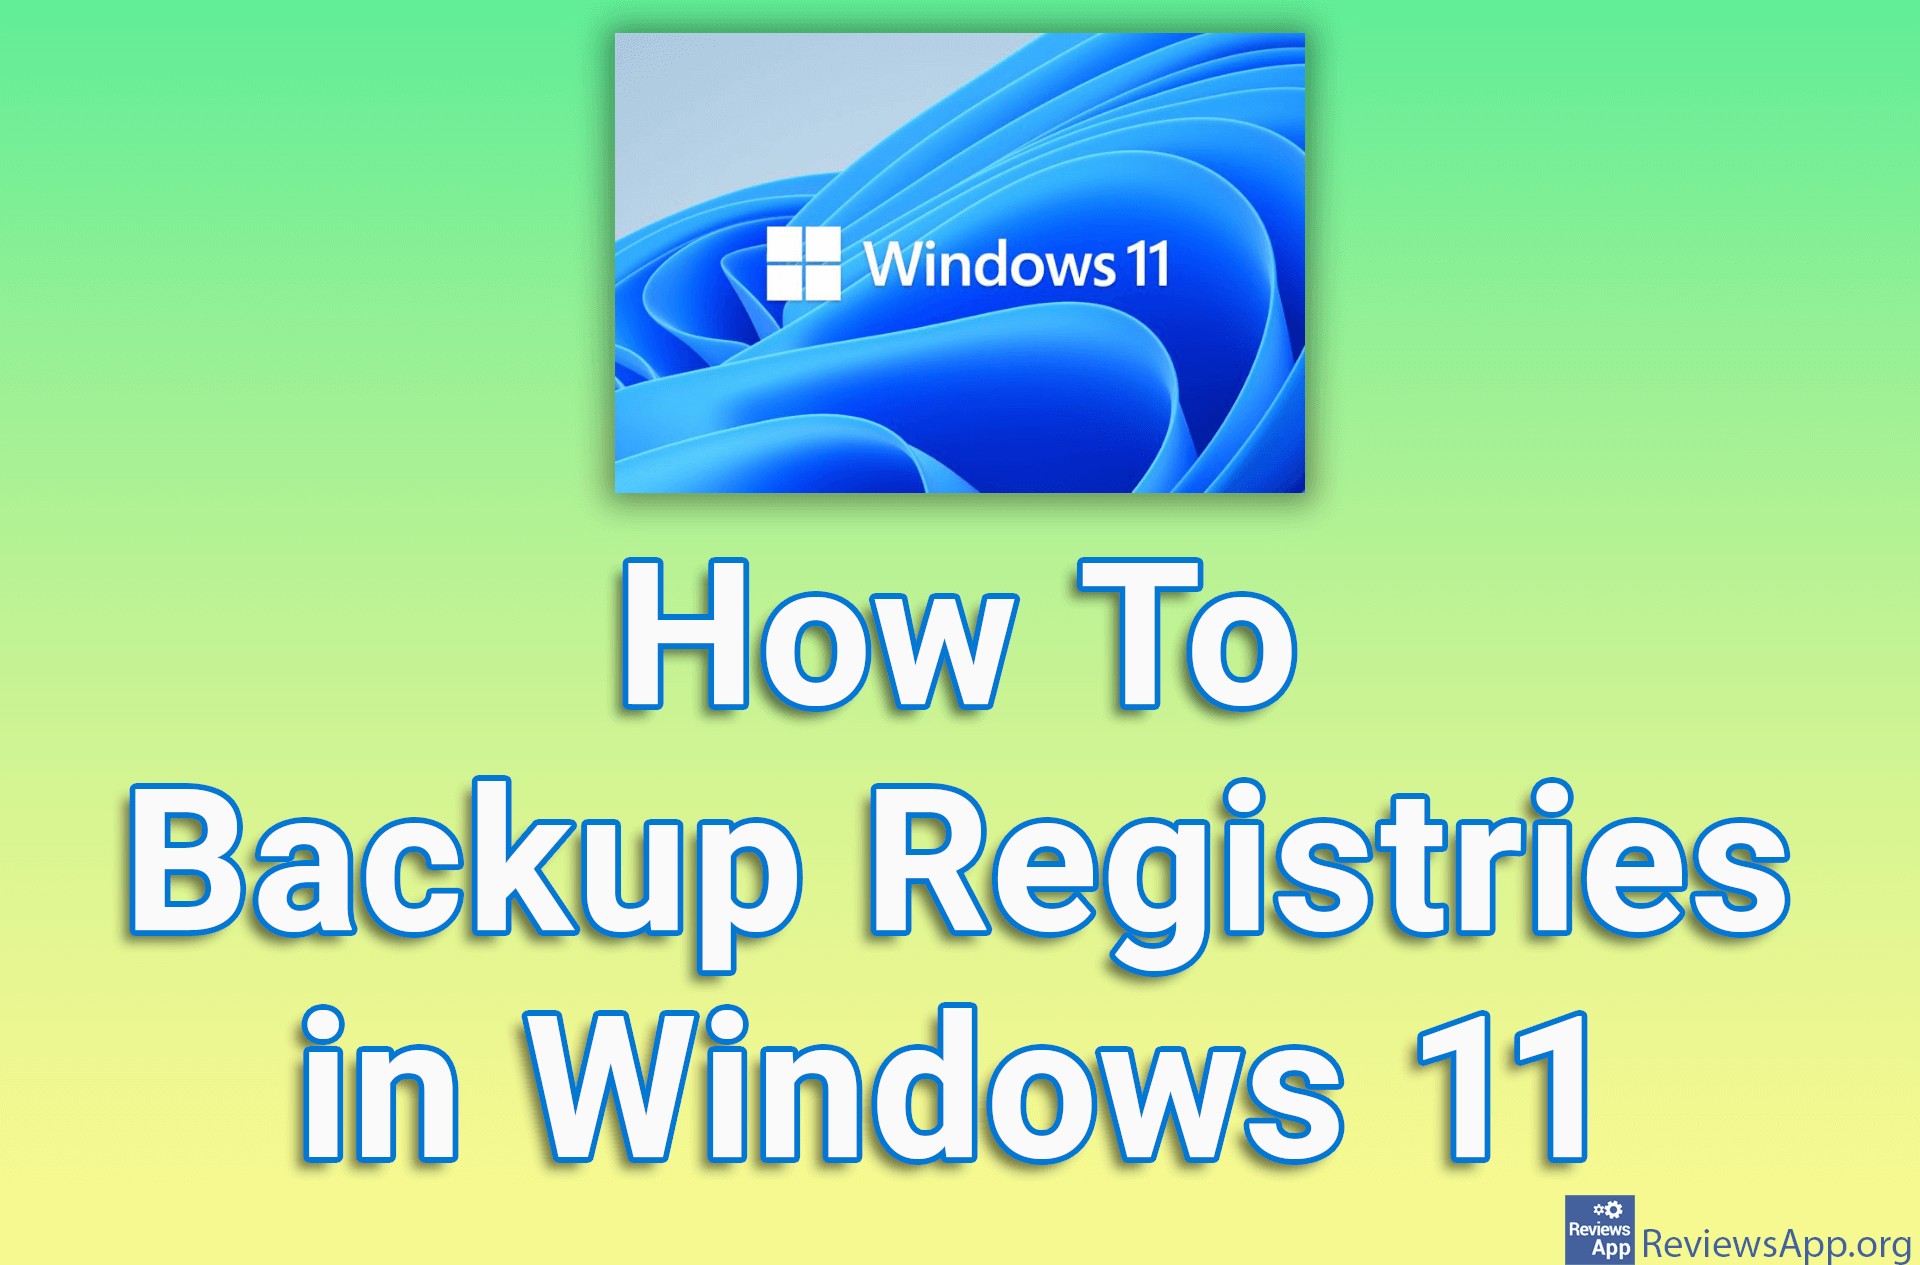 How To Backup Registries in Windows 11